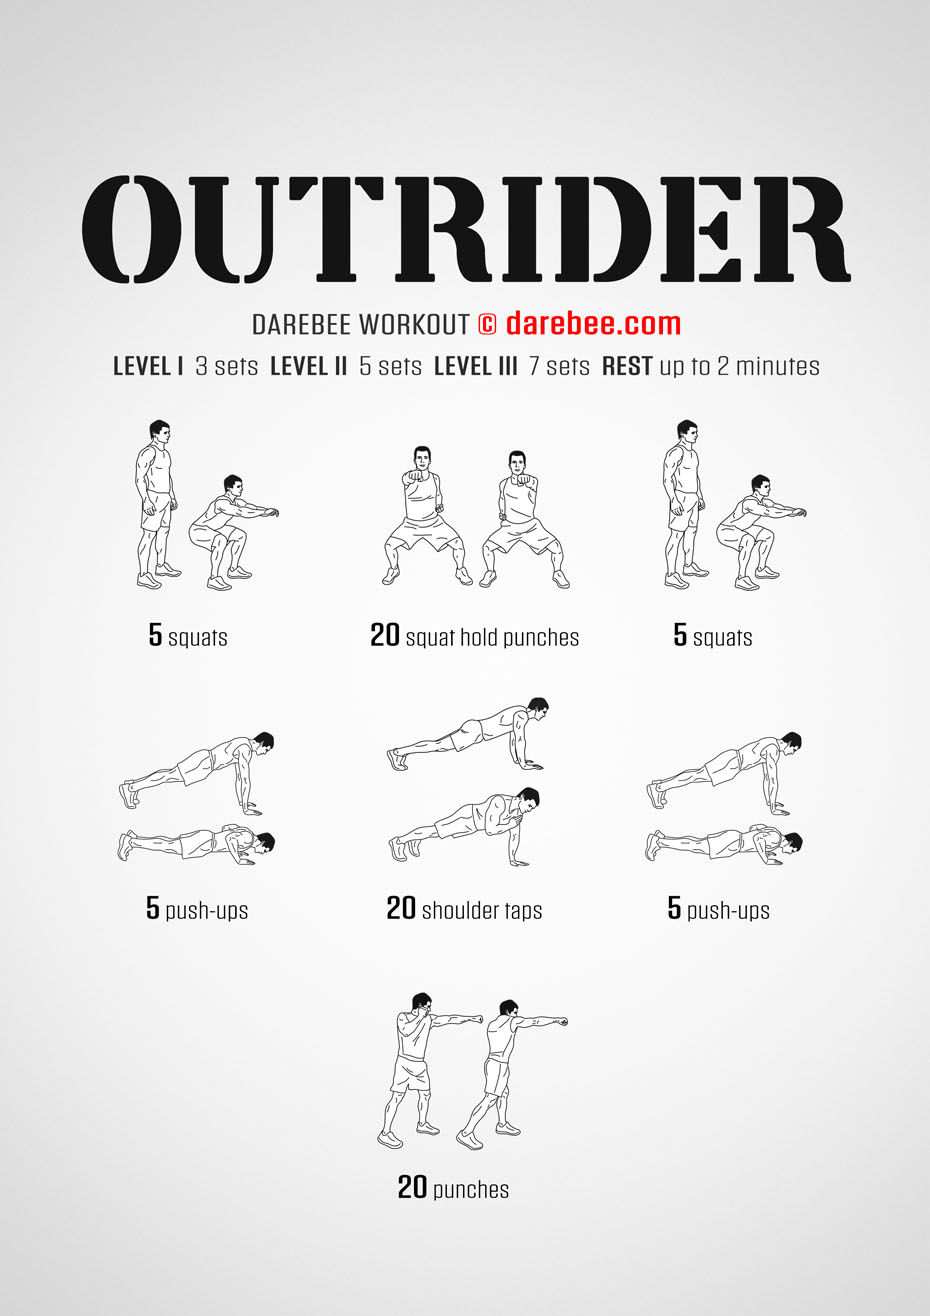 Outrider uses a combination of both dynamic and static exercises to raise your body temperature and improve your fitness level.